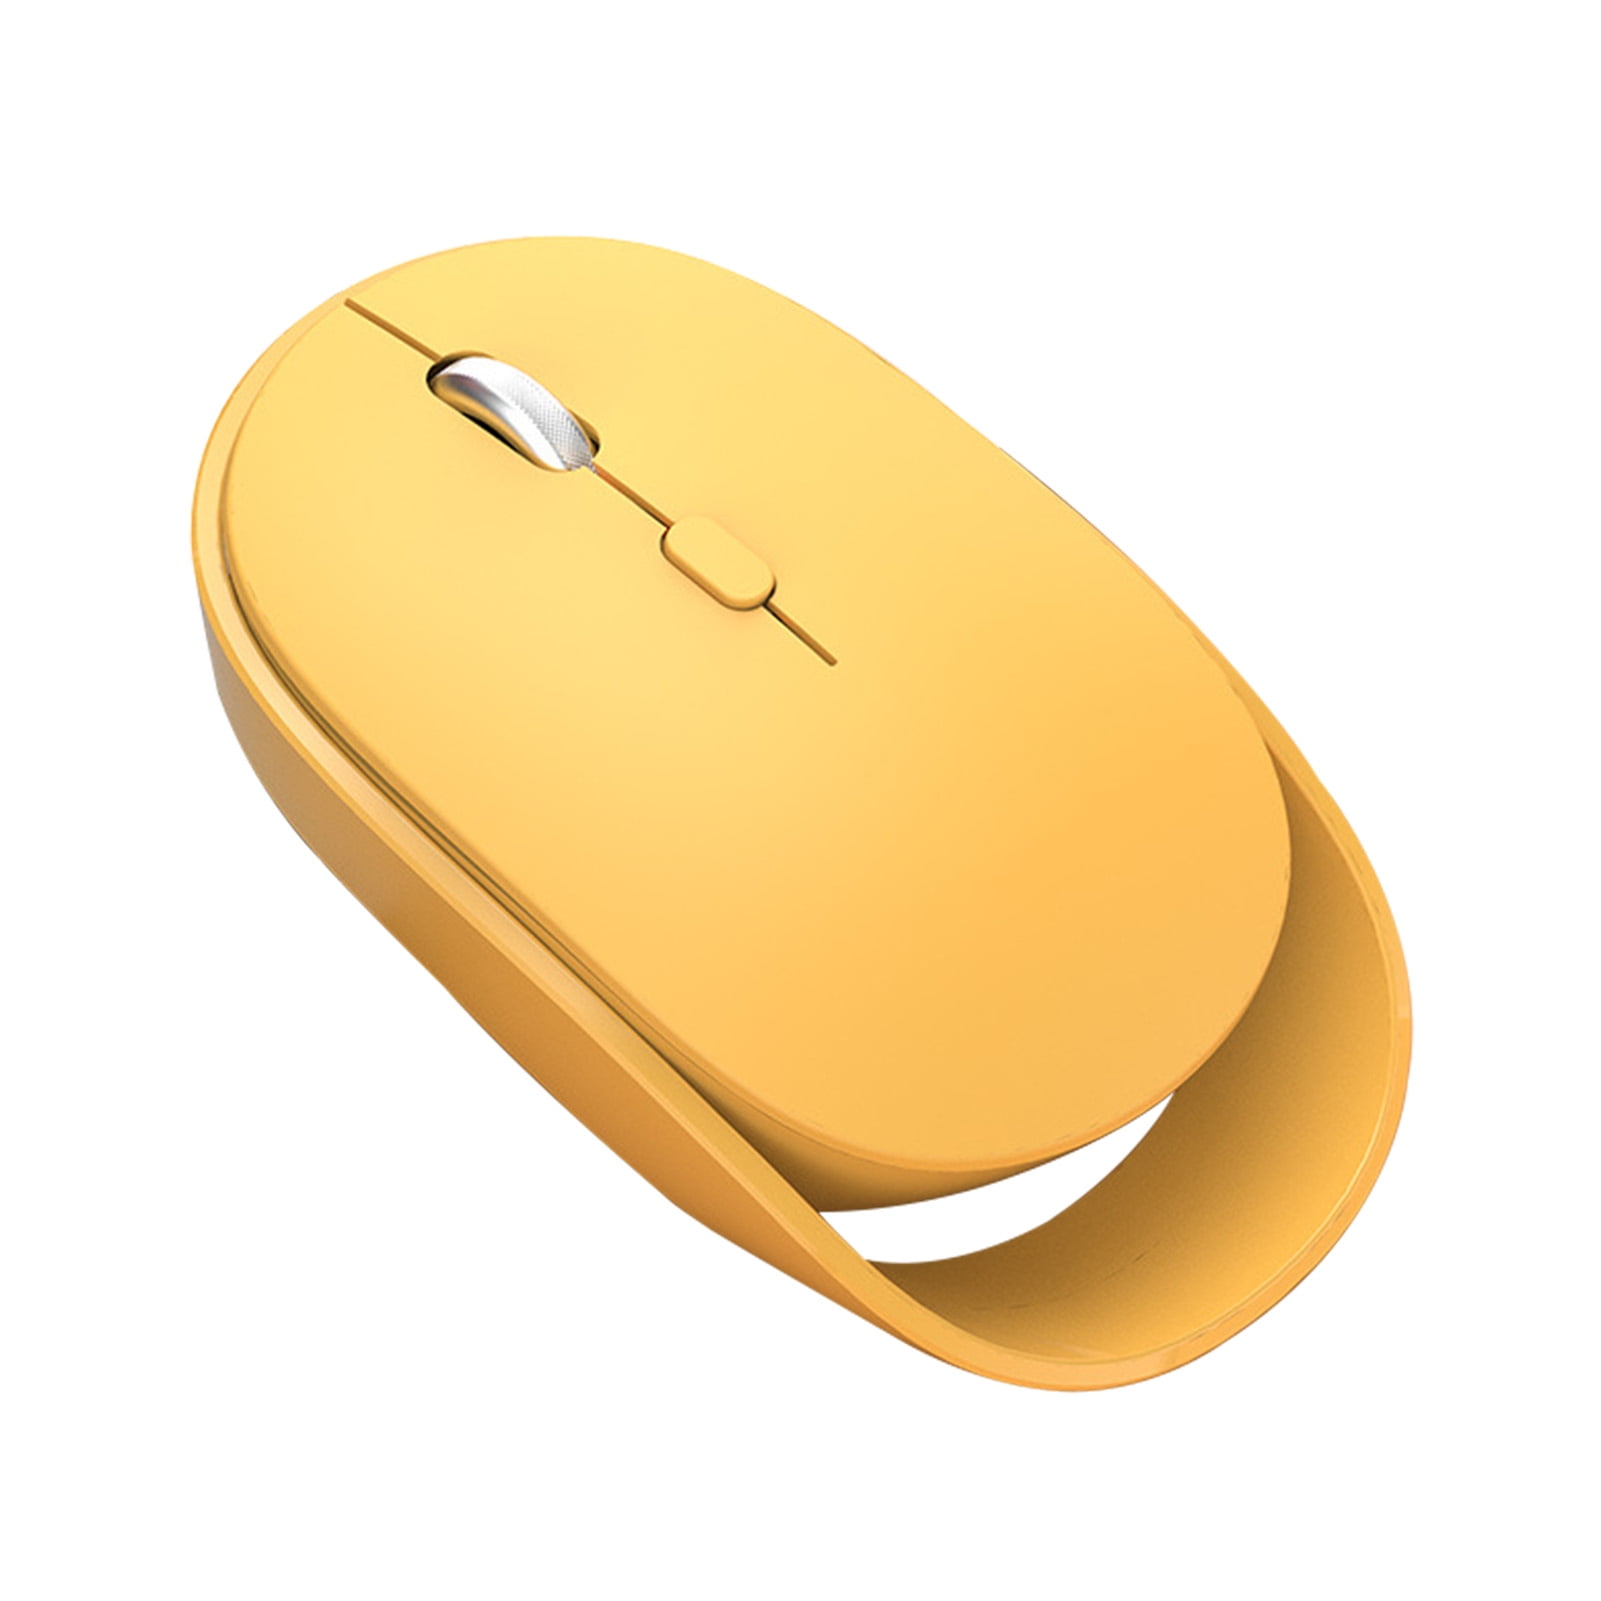 Wireless Mouse Yellow Portable 2.4G 1600DPI High Precision Optical Mouse with 10 Transmission Distance for PC Desktop Laptop Notebook Computer 